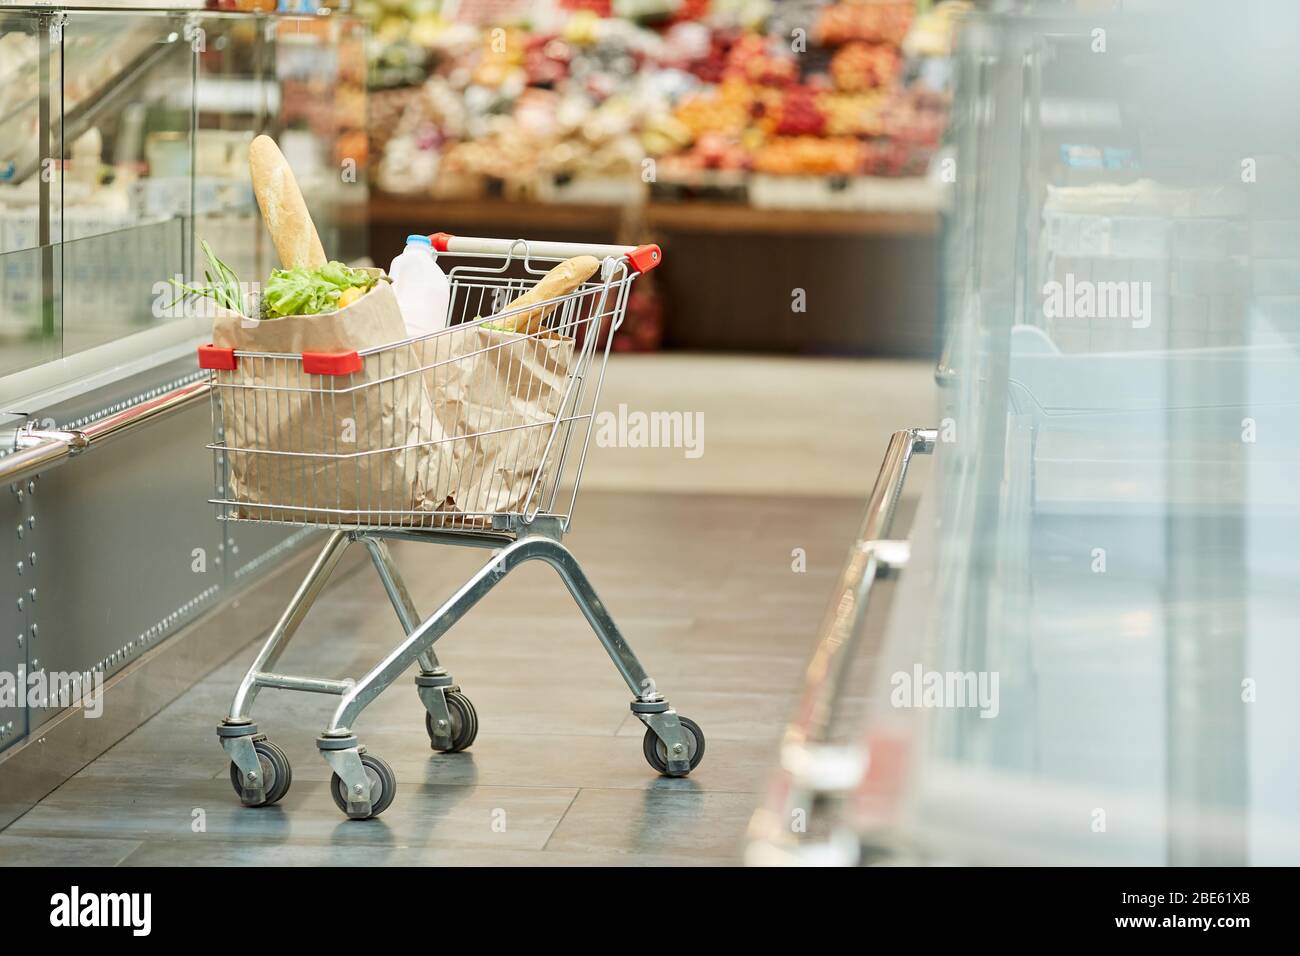 Background image of shopping cart with fresh groceries standing in supermarket isle, copy space Stock Photo